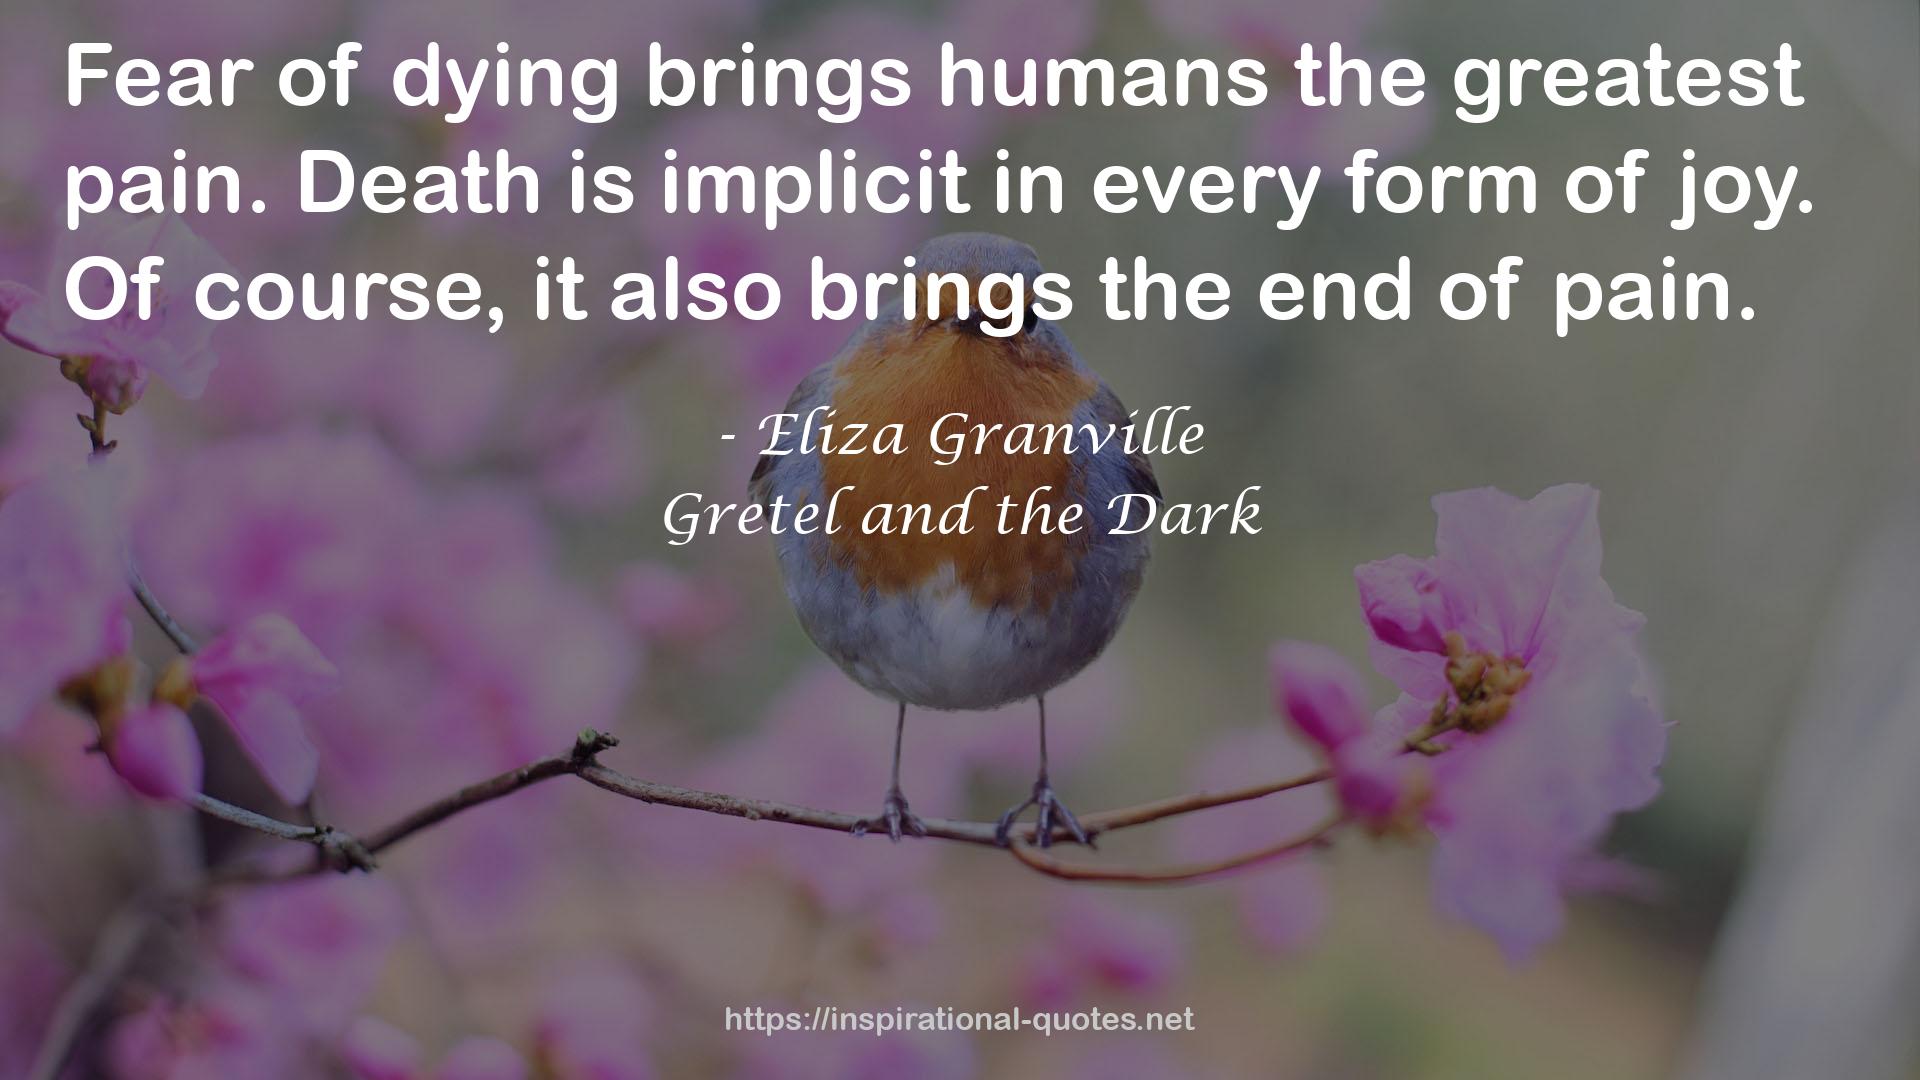 Gretel and the Dark QUOTES